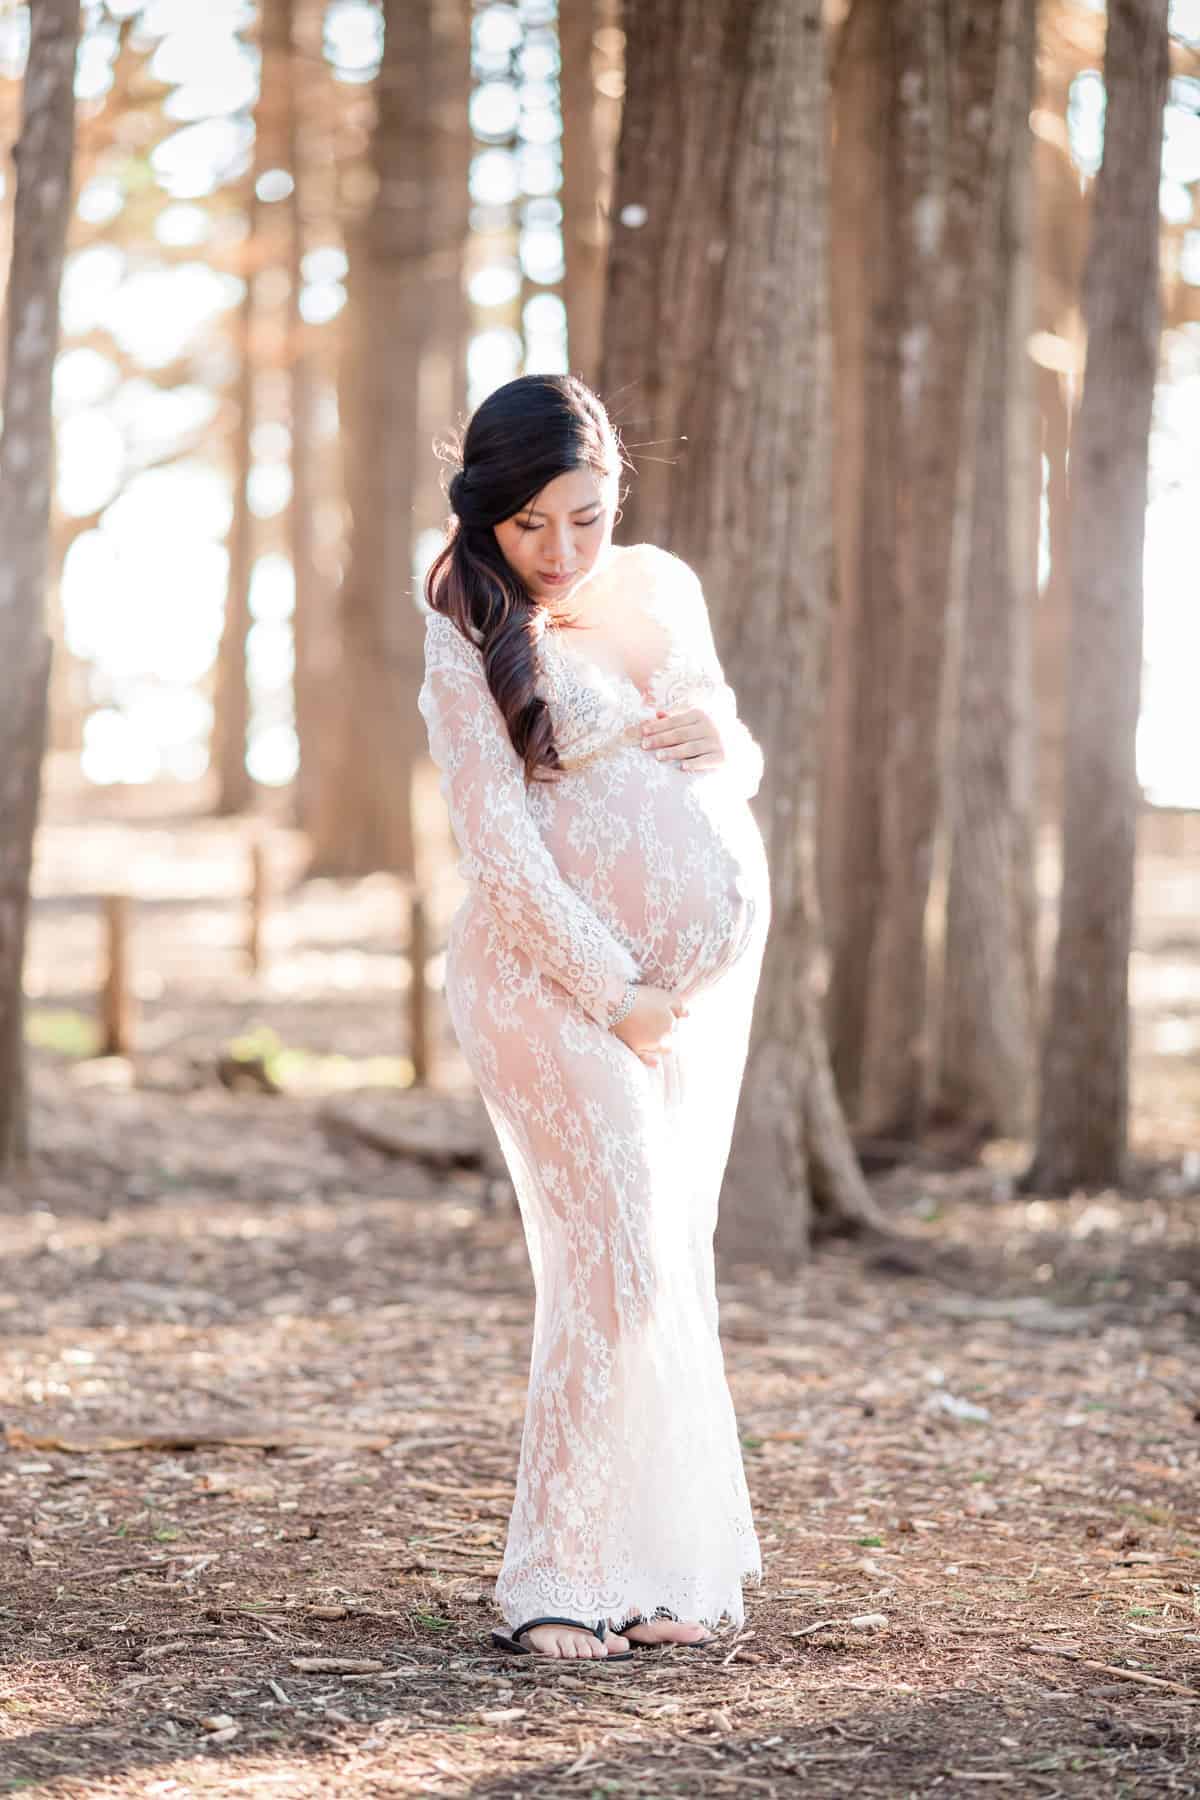 Seraphine: The Best 5 Maternity Dresses For Your Photoshoot